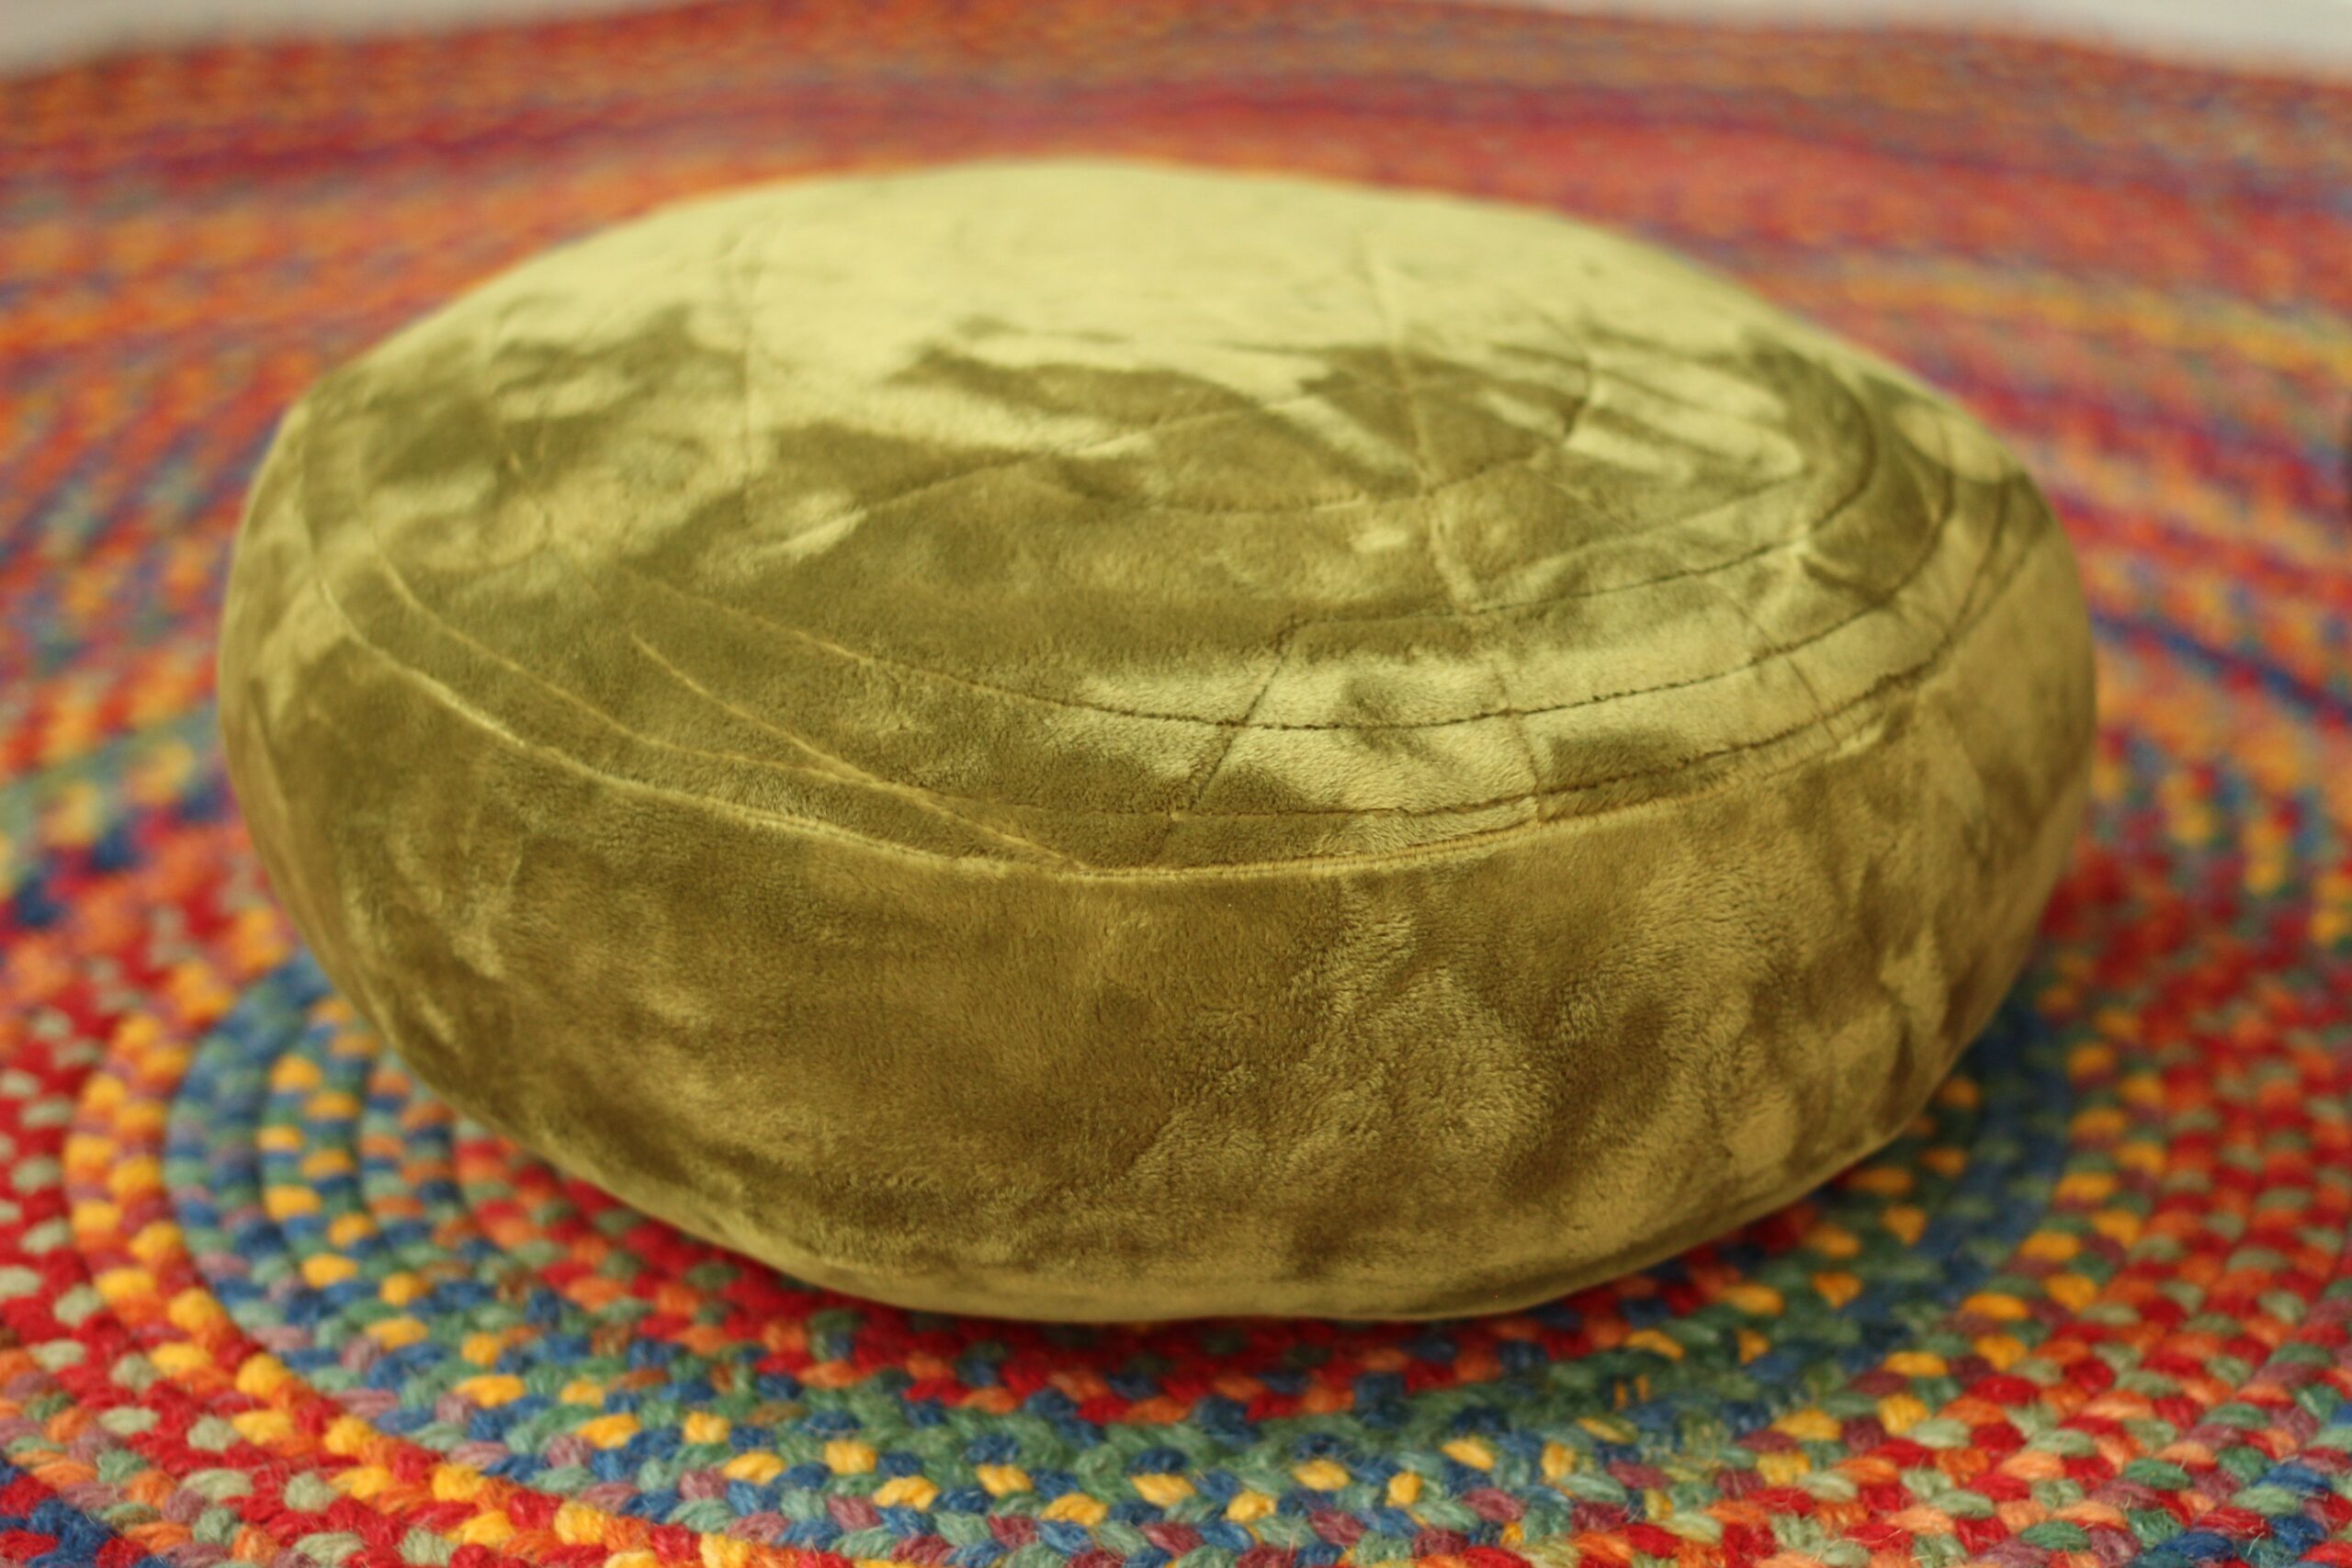 #1 Favorite Handmade Holiday Gift Idea:  How to Sew an Overstuffed ‘Minky’ Tuffet by Sewspire for Poly-fil Fairfield World